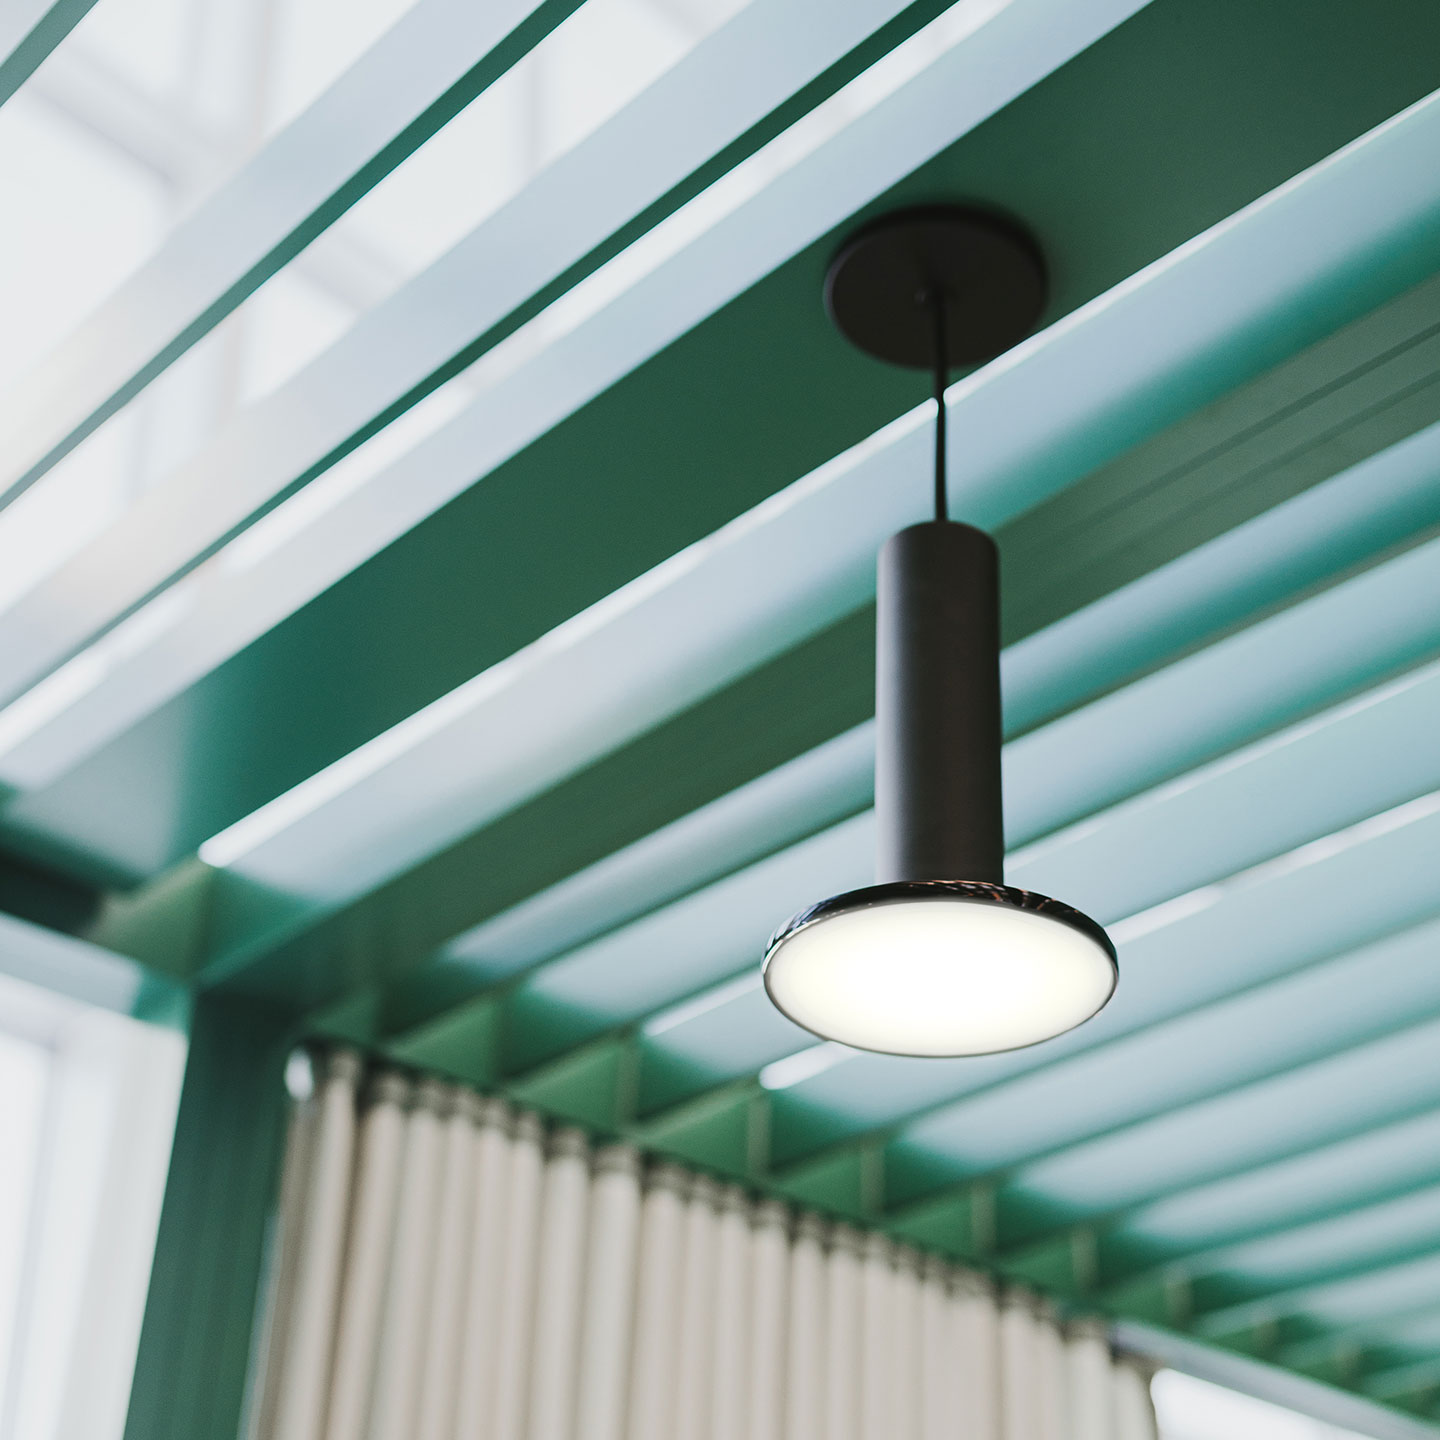 Haworth Cielo Lighting in black hanging from Pergola private workspace in green in an open office setting